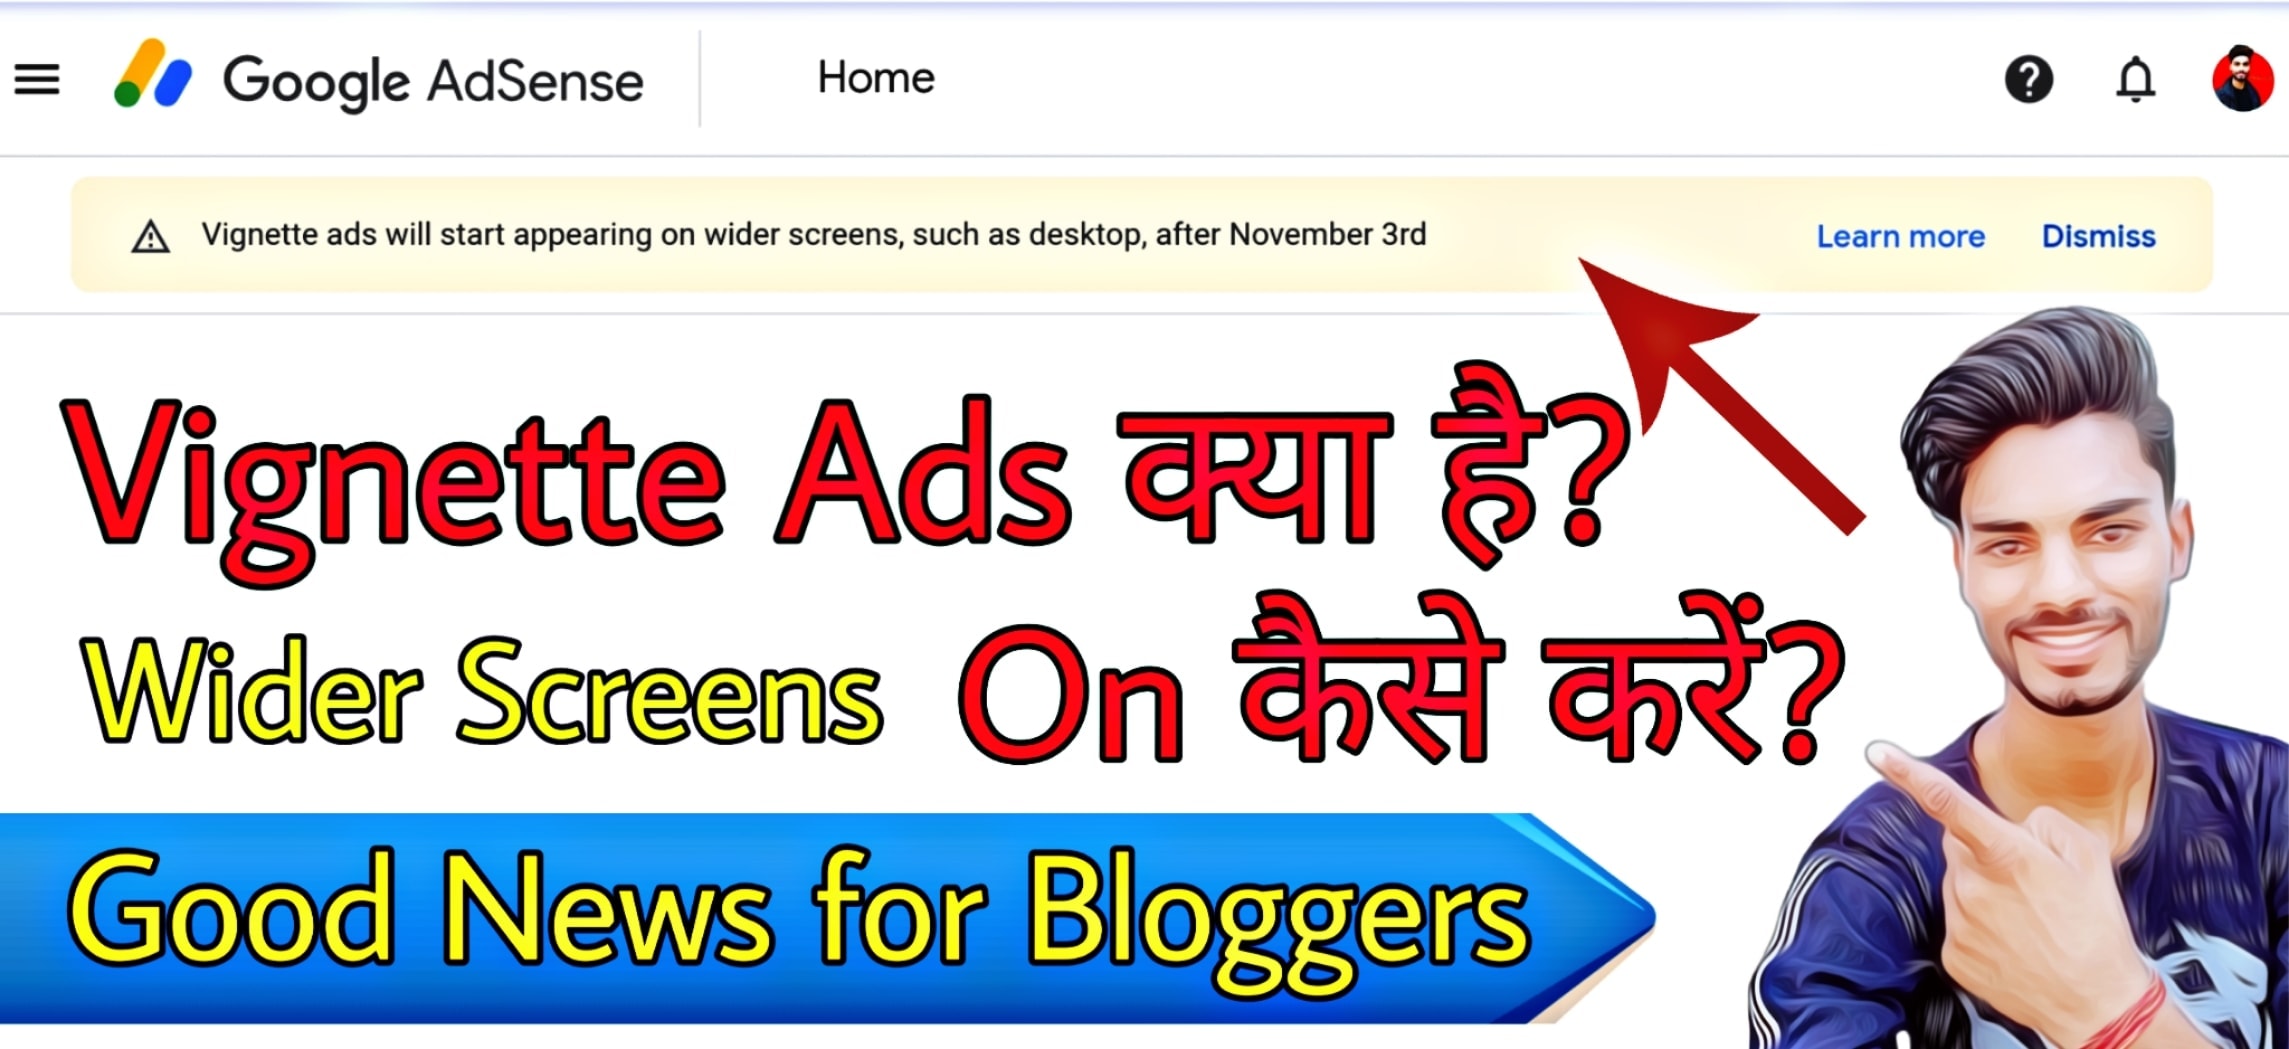 Google AdSense Vignette ads to Show on Wider Screens from 3 November 2020